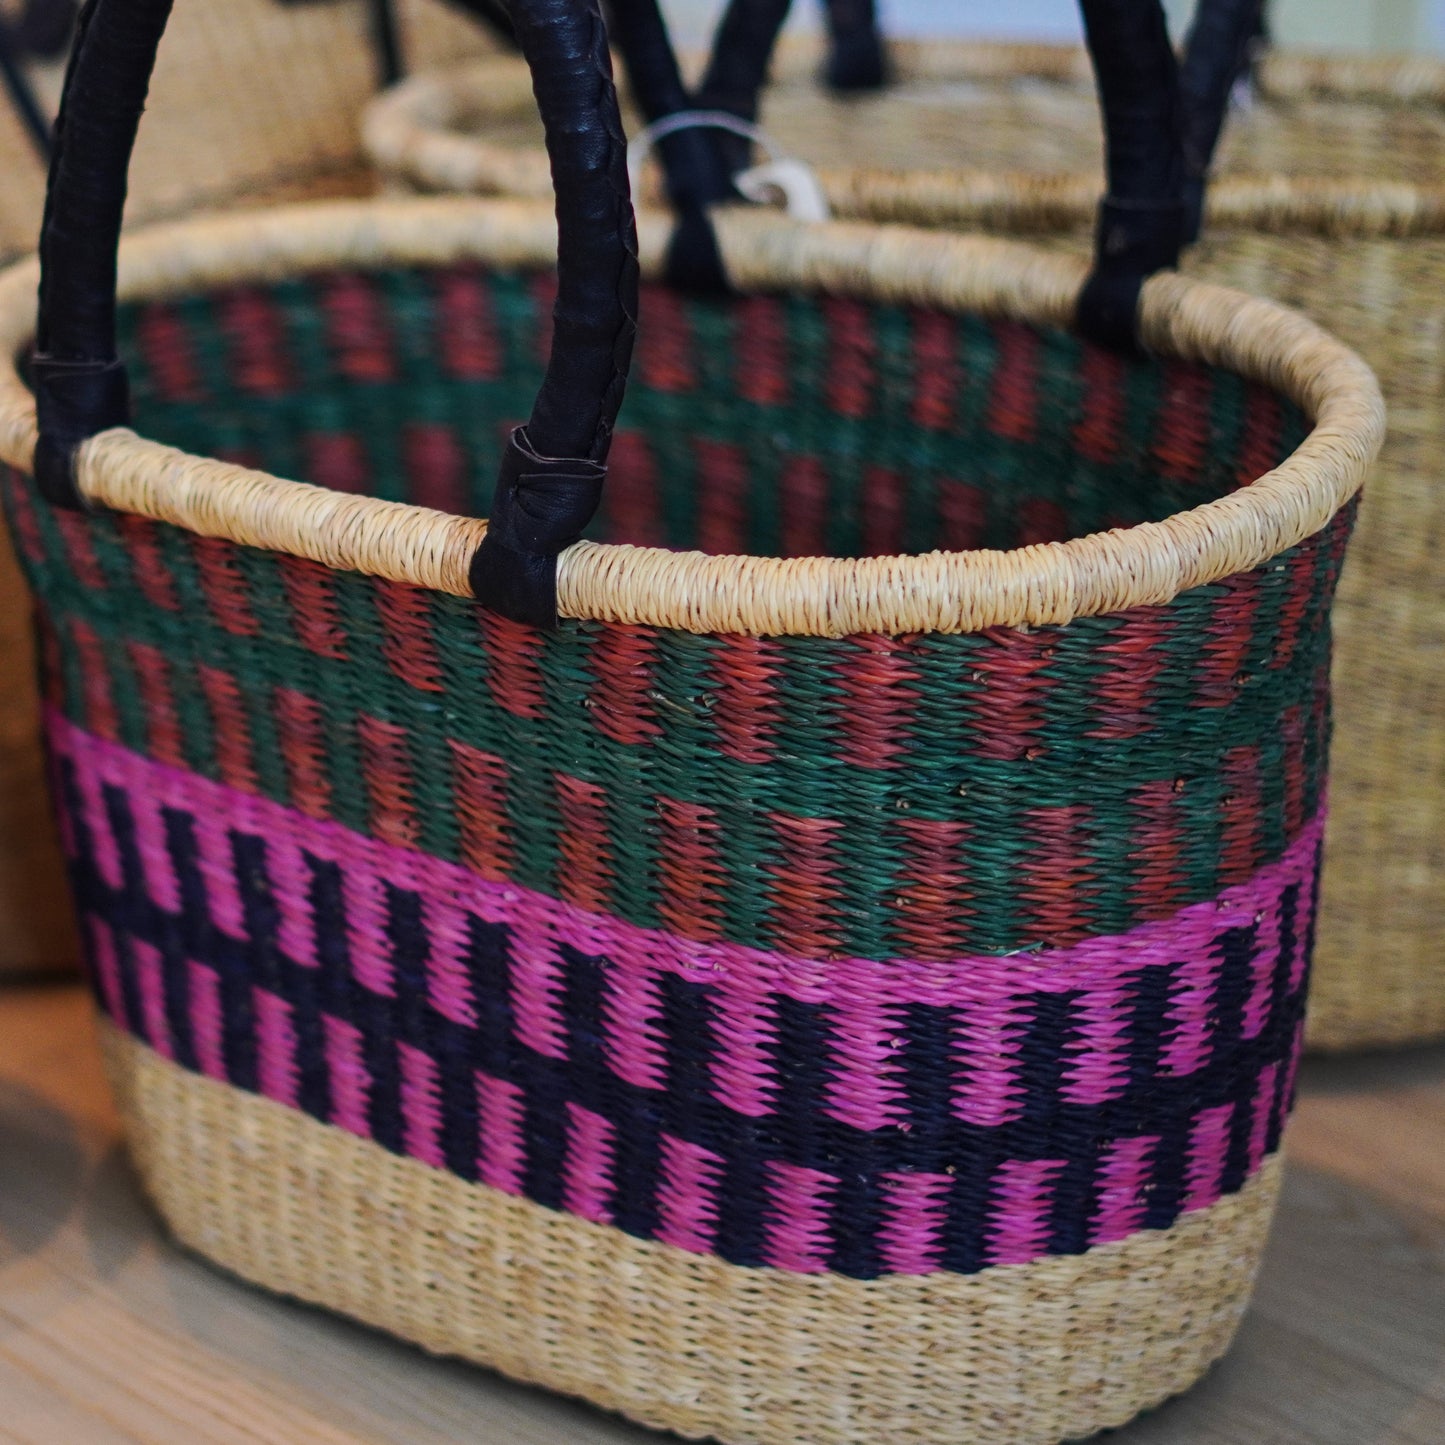 Shopping basket woven in sustainable sea grass. Three colors and Fair Trade from Ghana